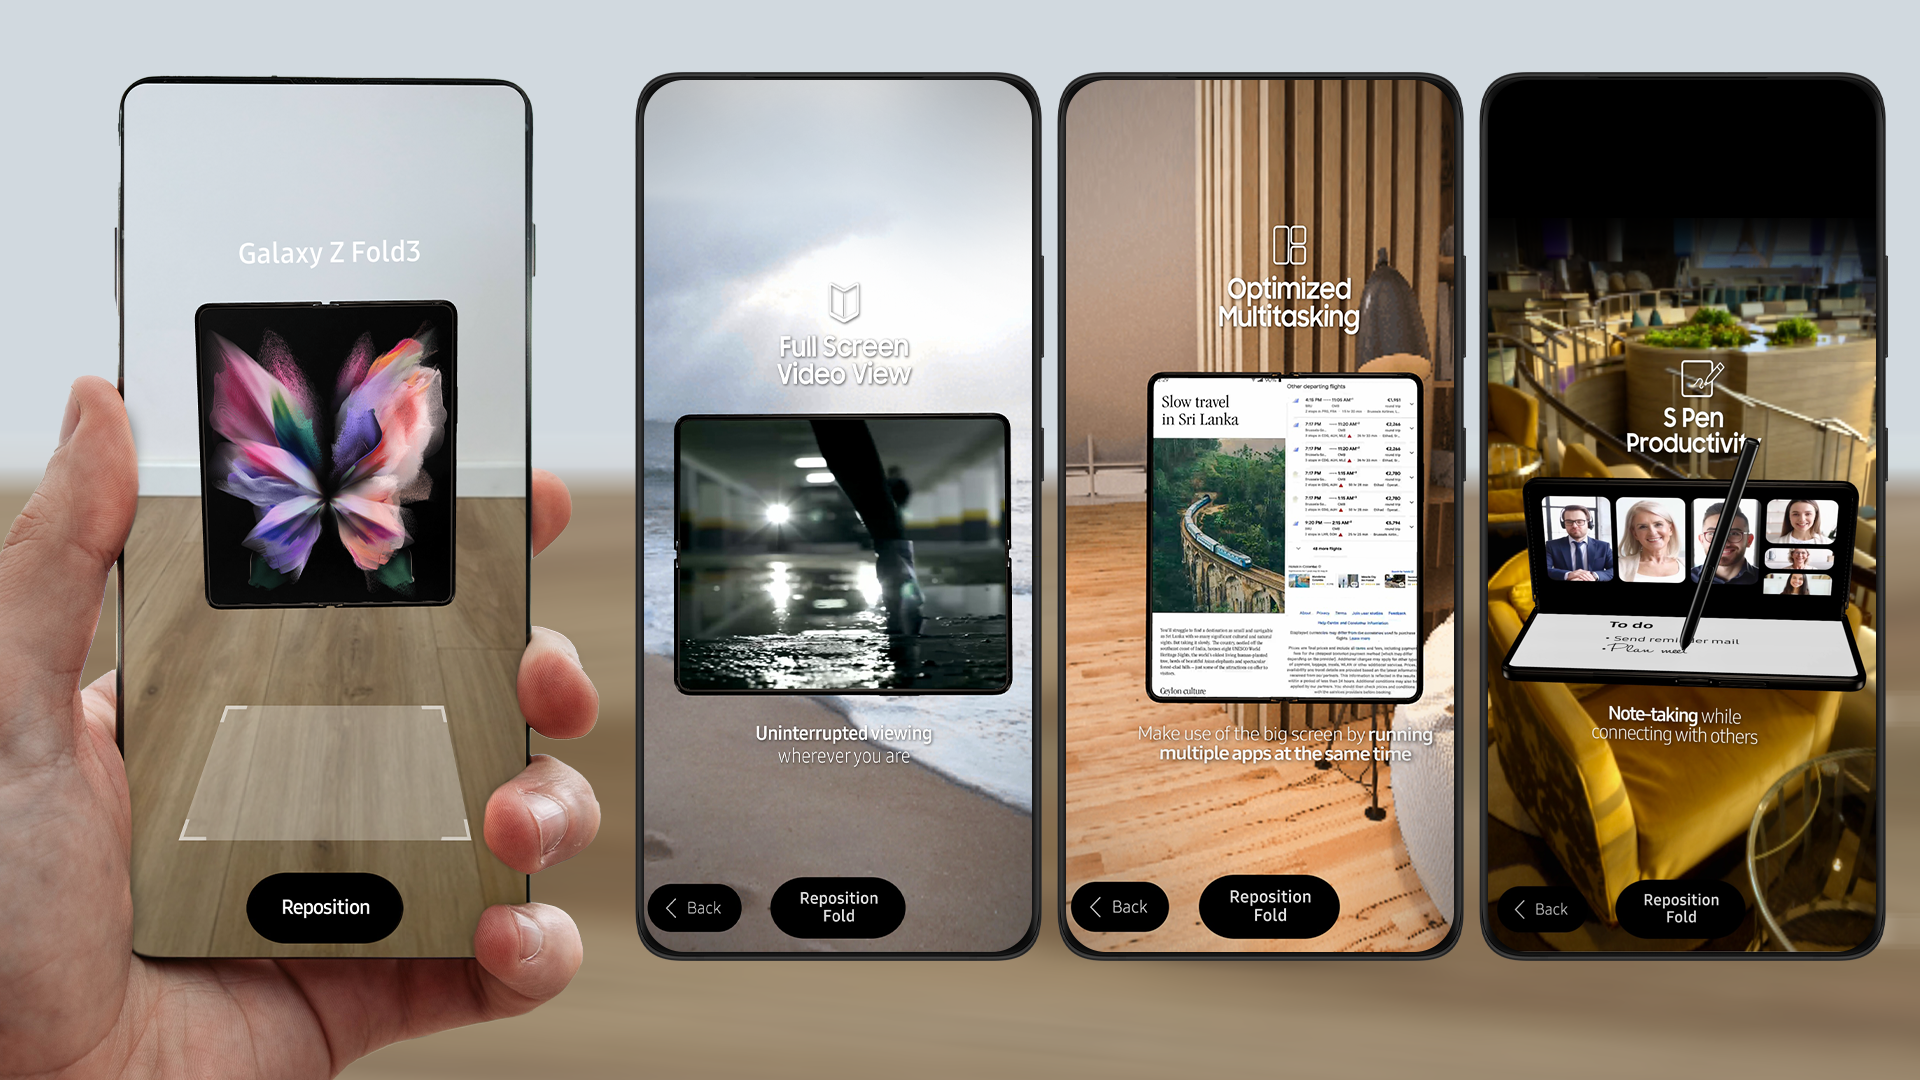 Galaxy Z Fold3 Augmented Reality Experience on several phone screens.